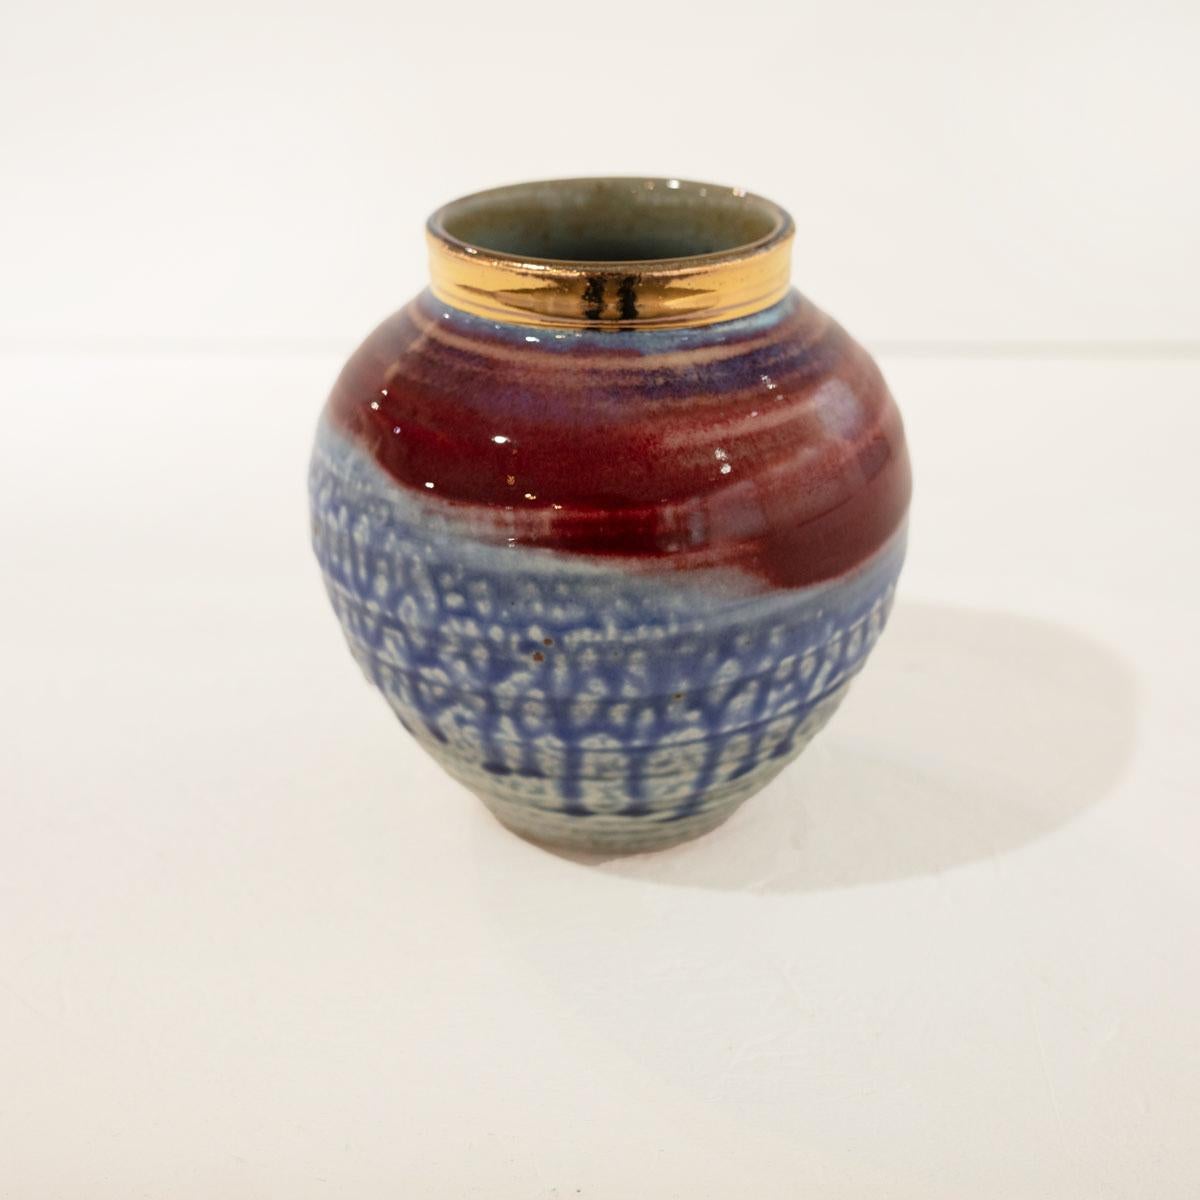 Small Red and Blue Ceramic Sculptural Vase - Sculpture by Jon Puzzuoli